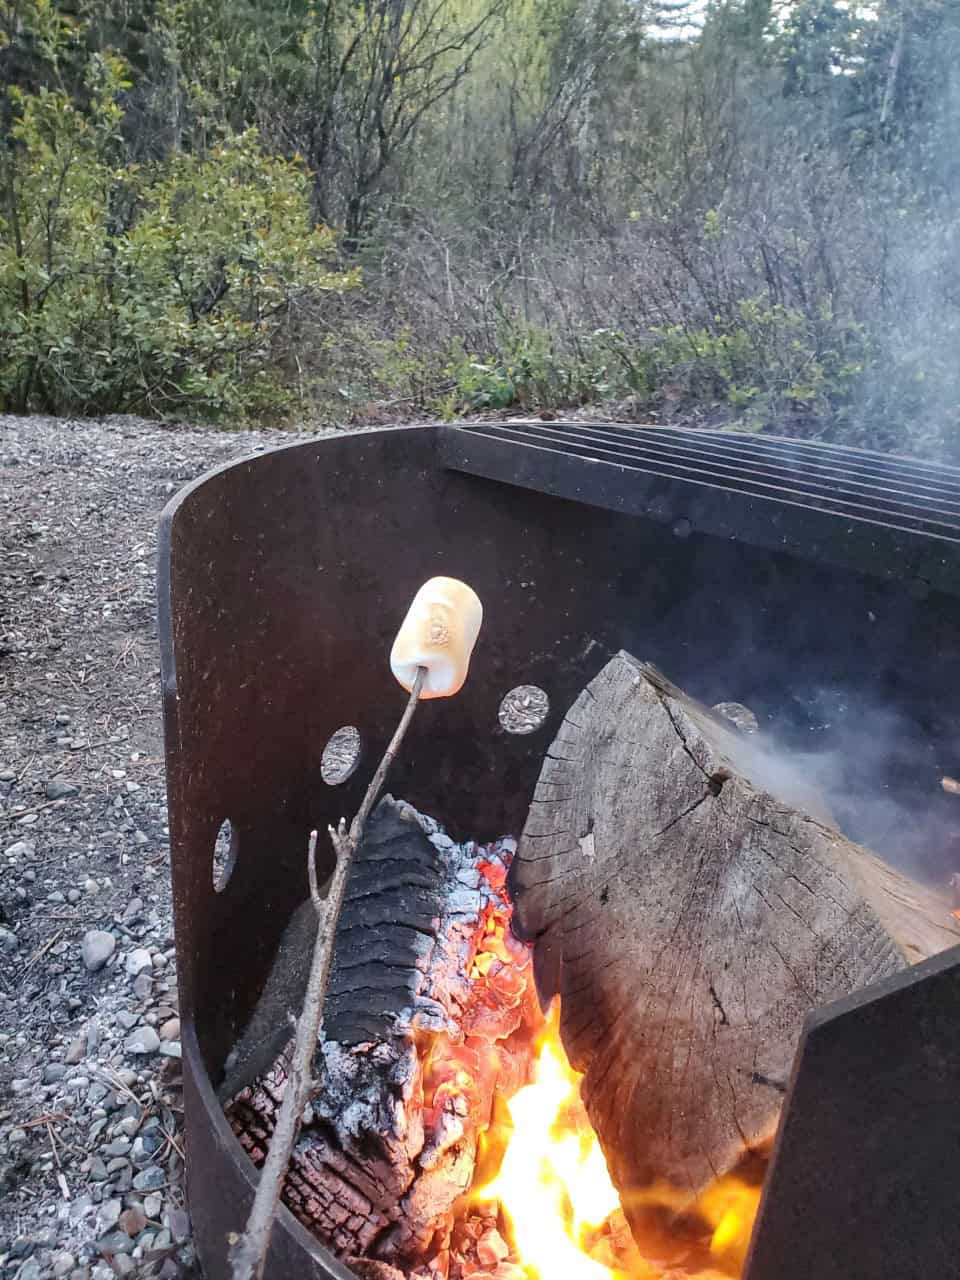 Roasting Marshmallows Over the Fire - Making marshmallows for some campfire s'mores!